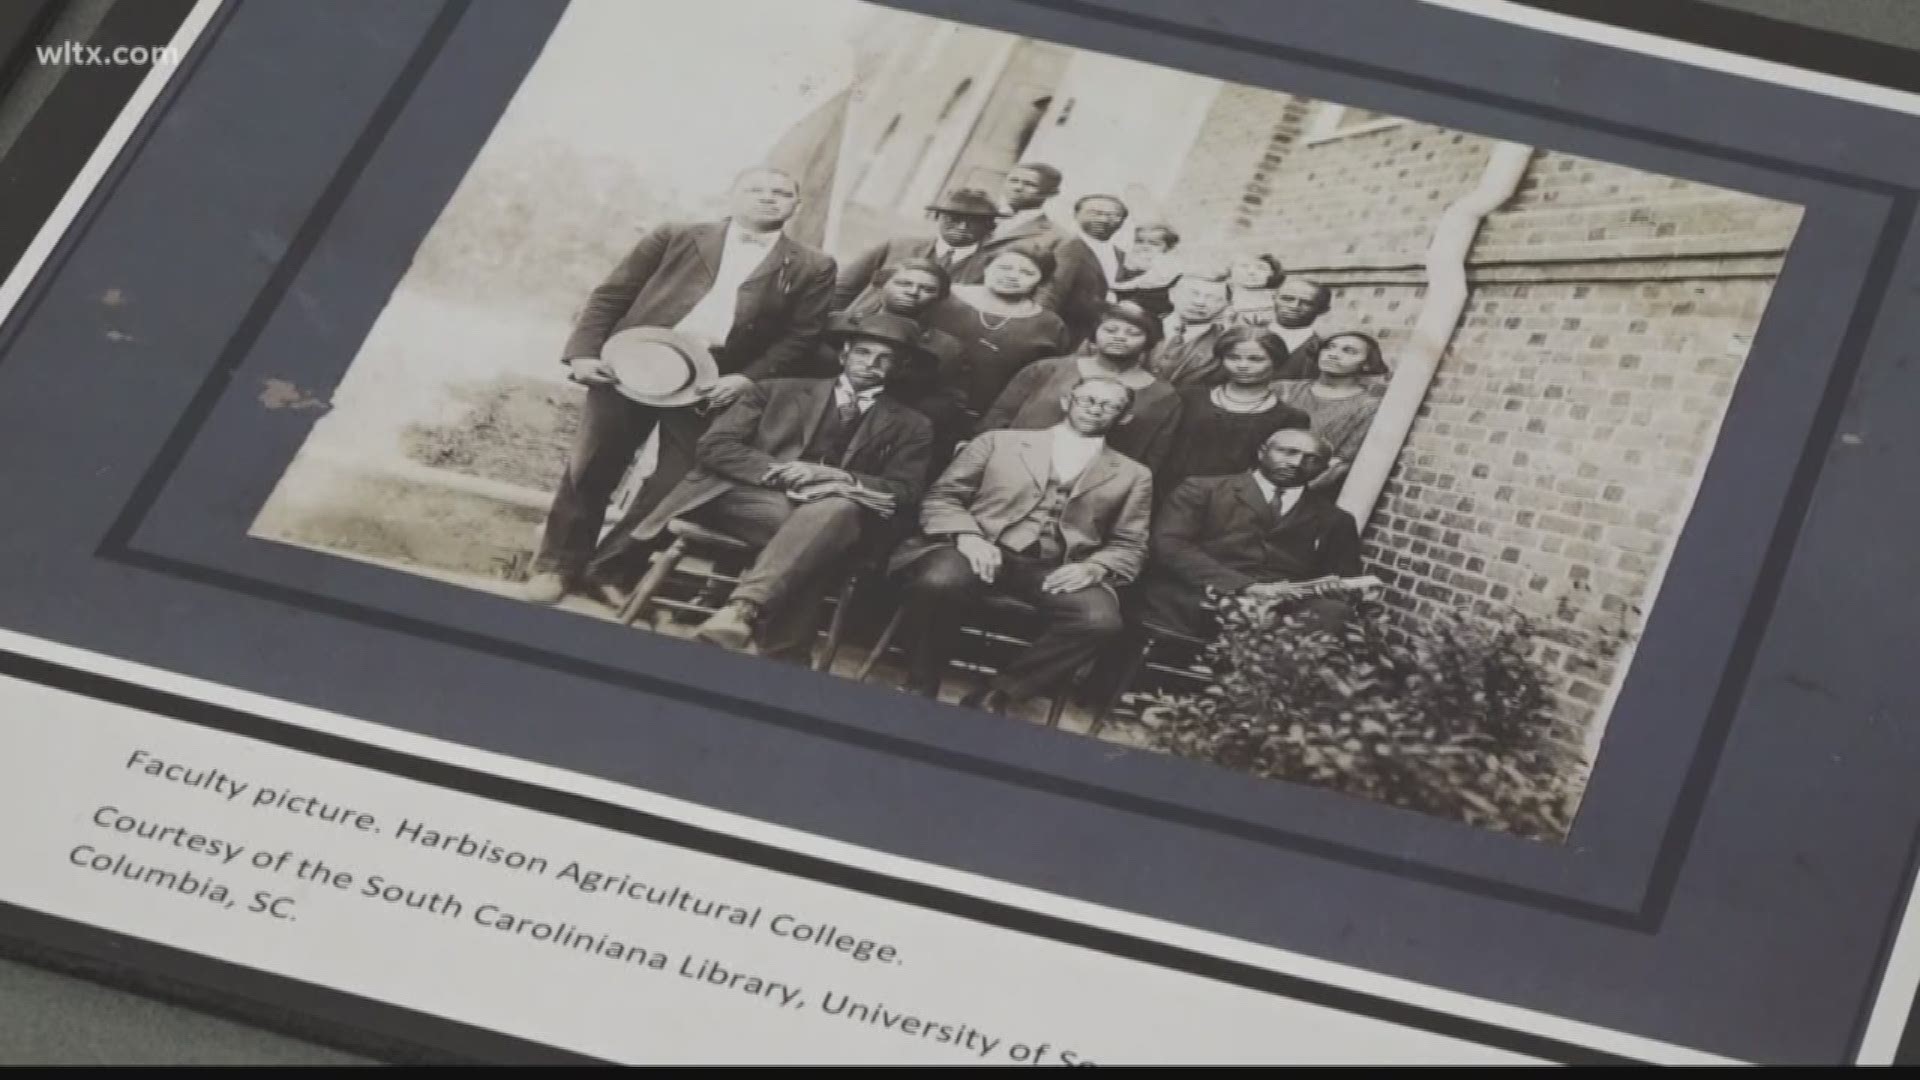 The Irmo Branch Library has been showcasing Irmo's history for two years now